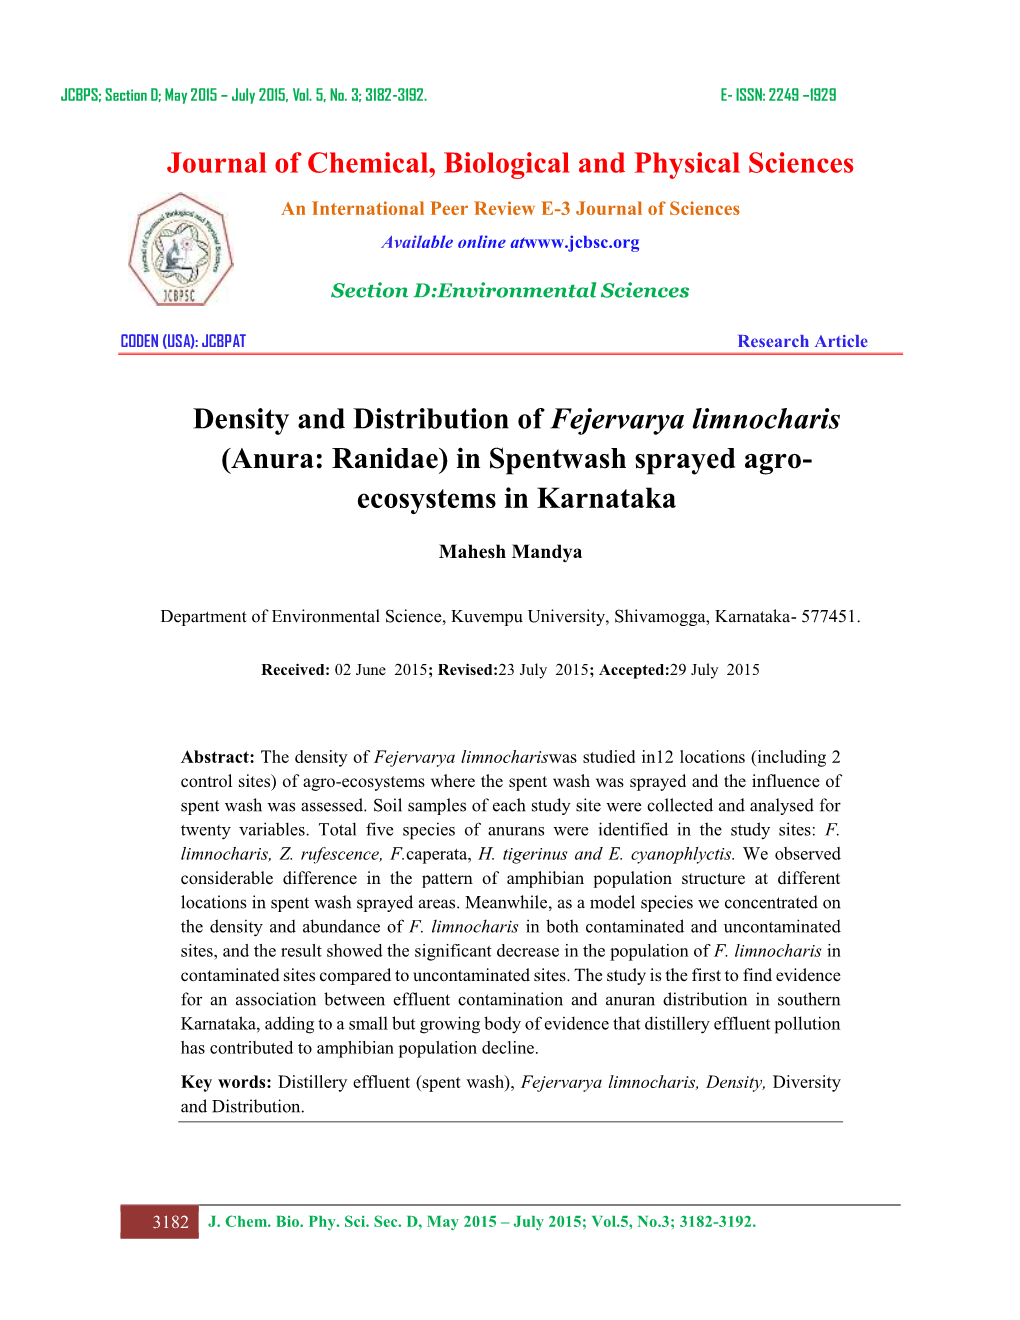 Journal of Chemical, Biological and Physical Sciences Density and Distribution of Fejervarya Limnocharis (Anura: Ranidae) In